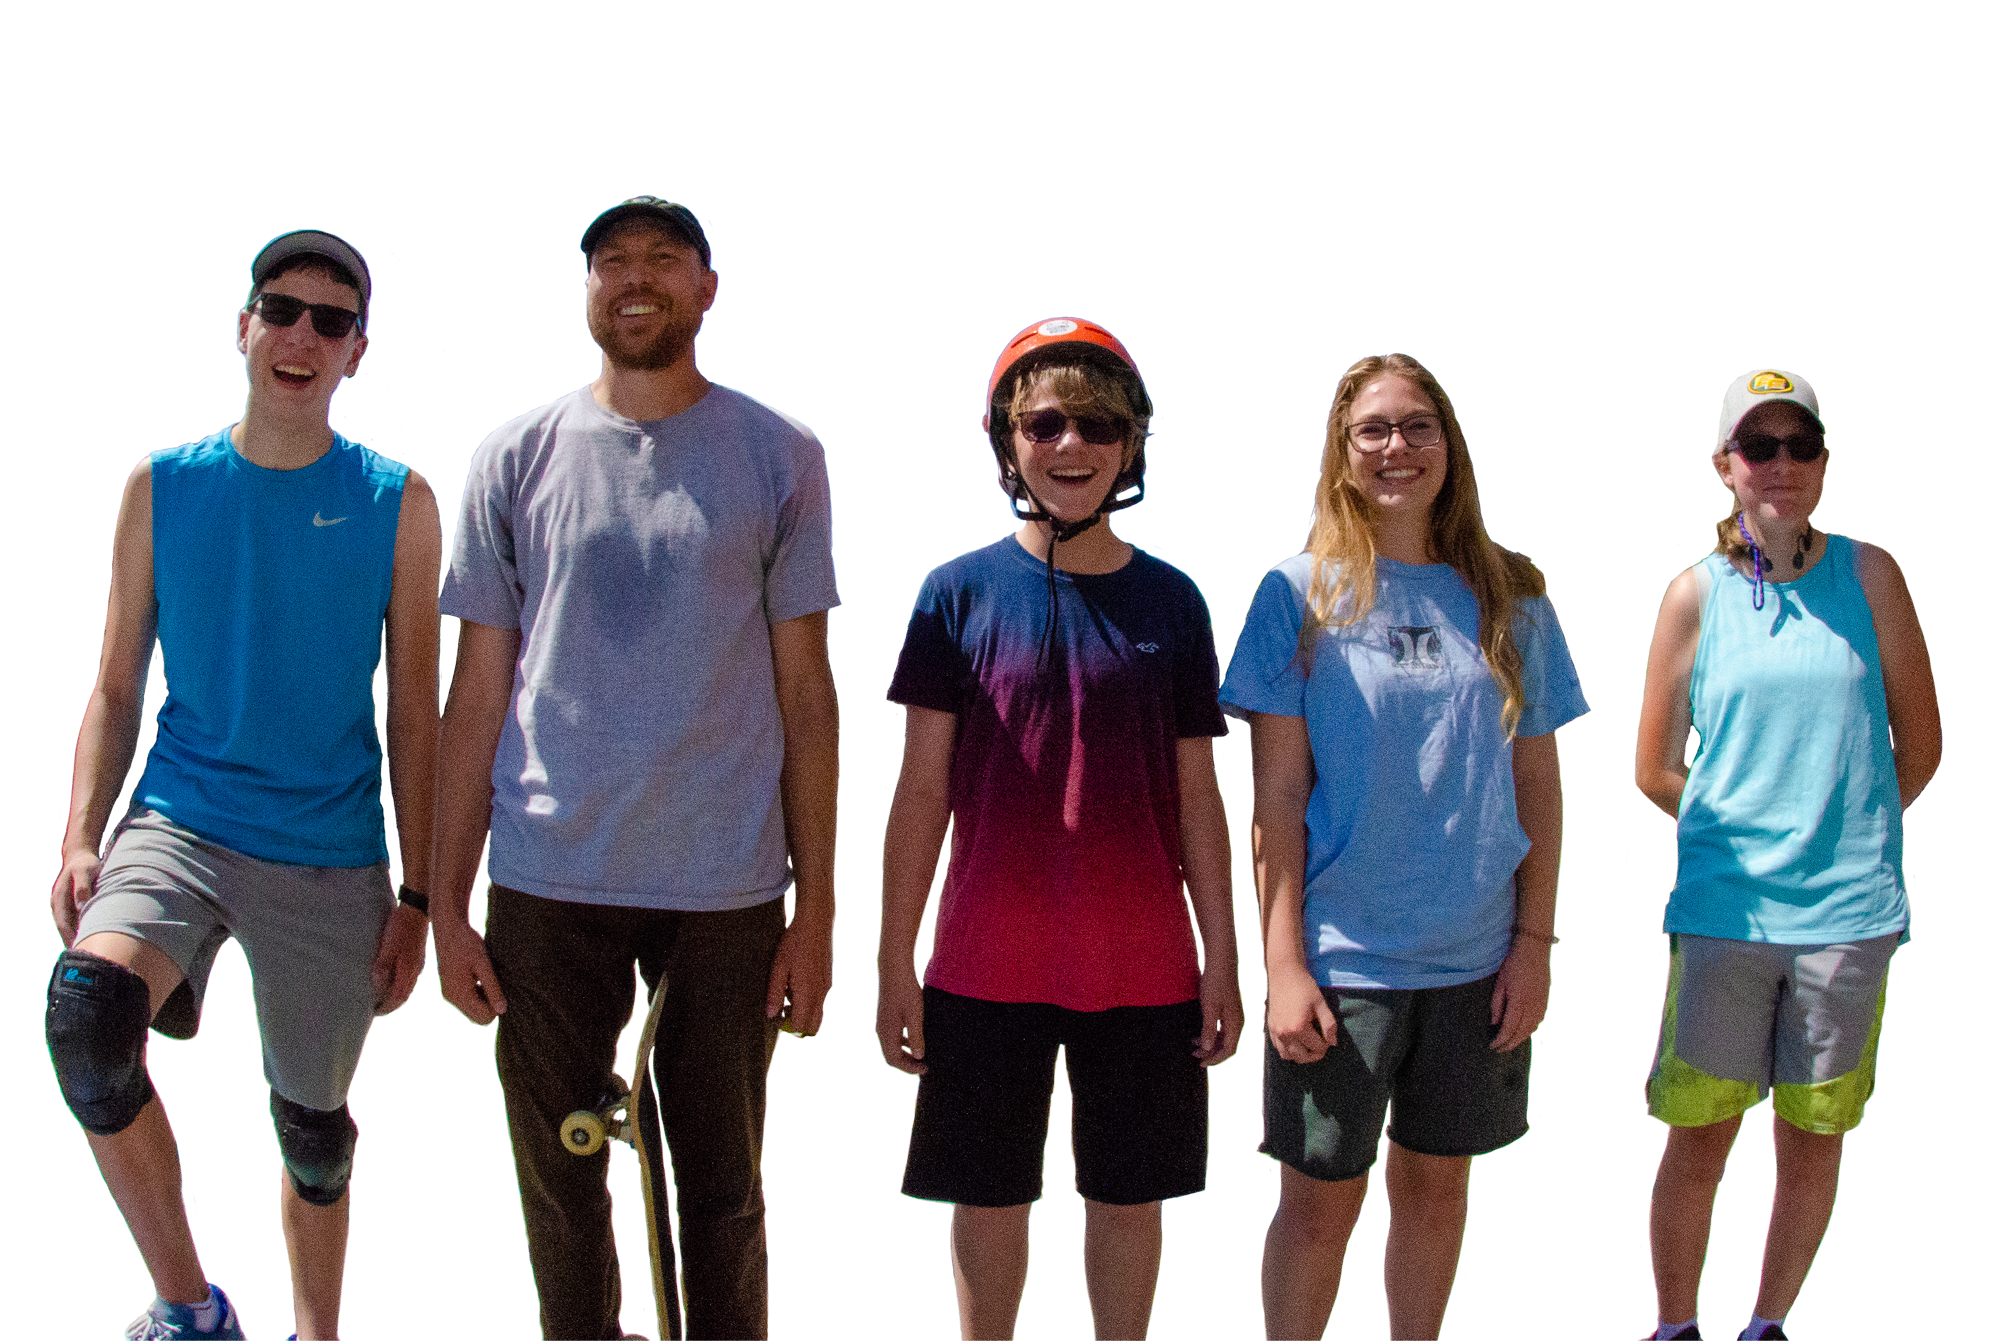 A photo of 5 low vision skate boarders standing and smiling. From the left. A smiling teenage boy with shades, in a blue shirt, grey shorts, with black knee pads. A smiling young man with a baseball cap, grey t-shirt, brown khakis with a skate board propped on his left leg. A smiling teenage boy, wearing a red helmet, shades, a t-shirt that fades from blue to magenta and black shorts. A smiling teenage girl with long light brown hair wearing a blue shirt and dark grey shorts. And last; a smirking teenage girl wearing a grey Edmonton Elks baseball cap, blue shirt and grey and green shorts.